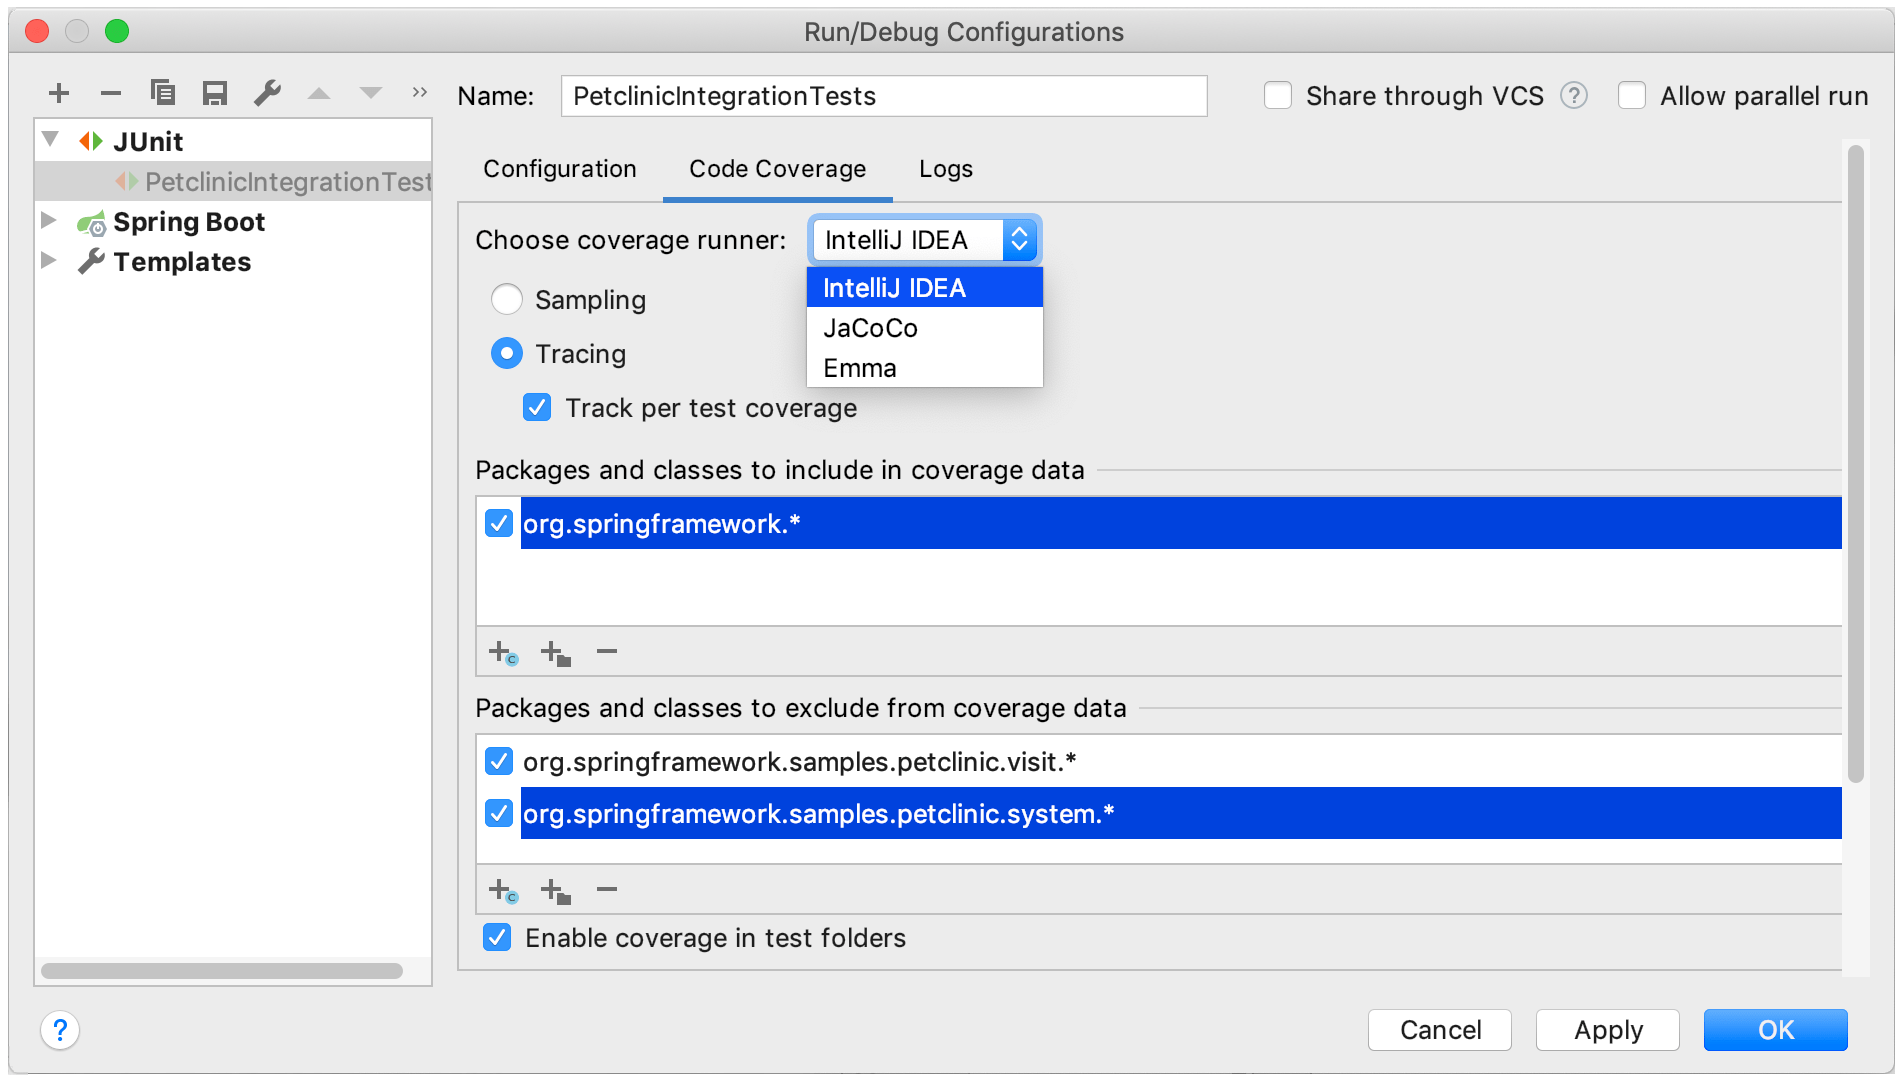 Code Coverage tab in the Run/debug Configuration dialog